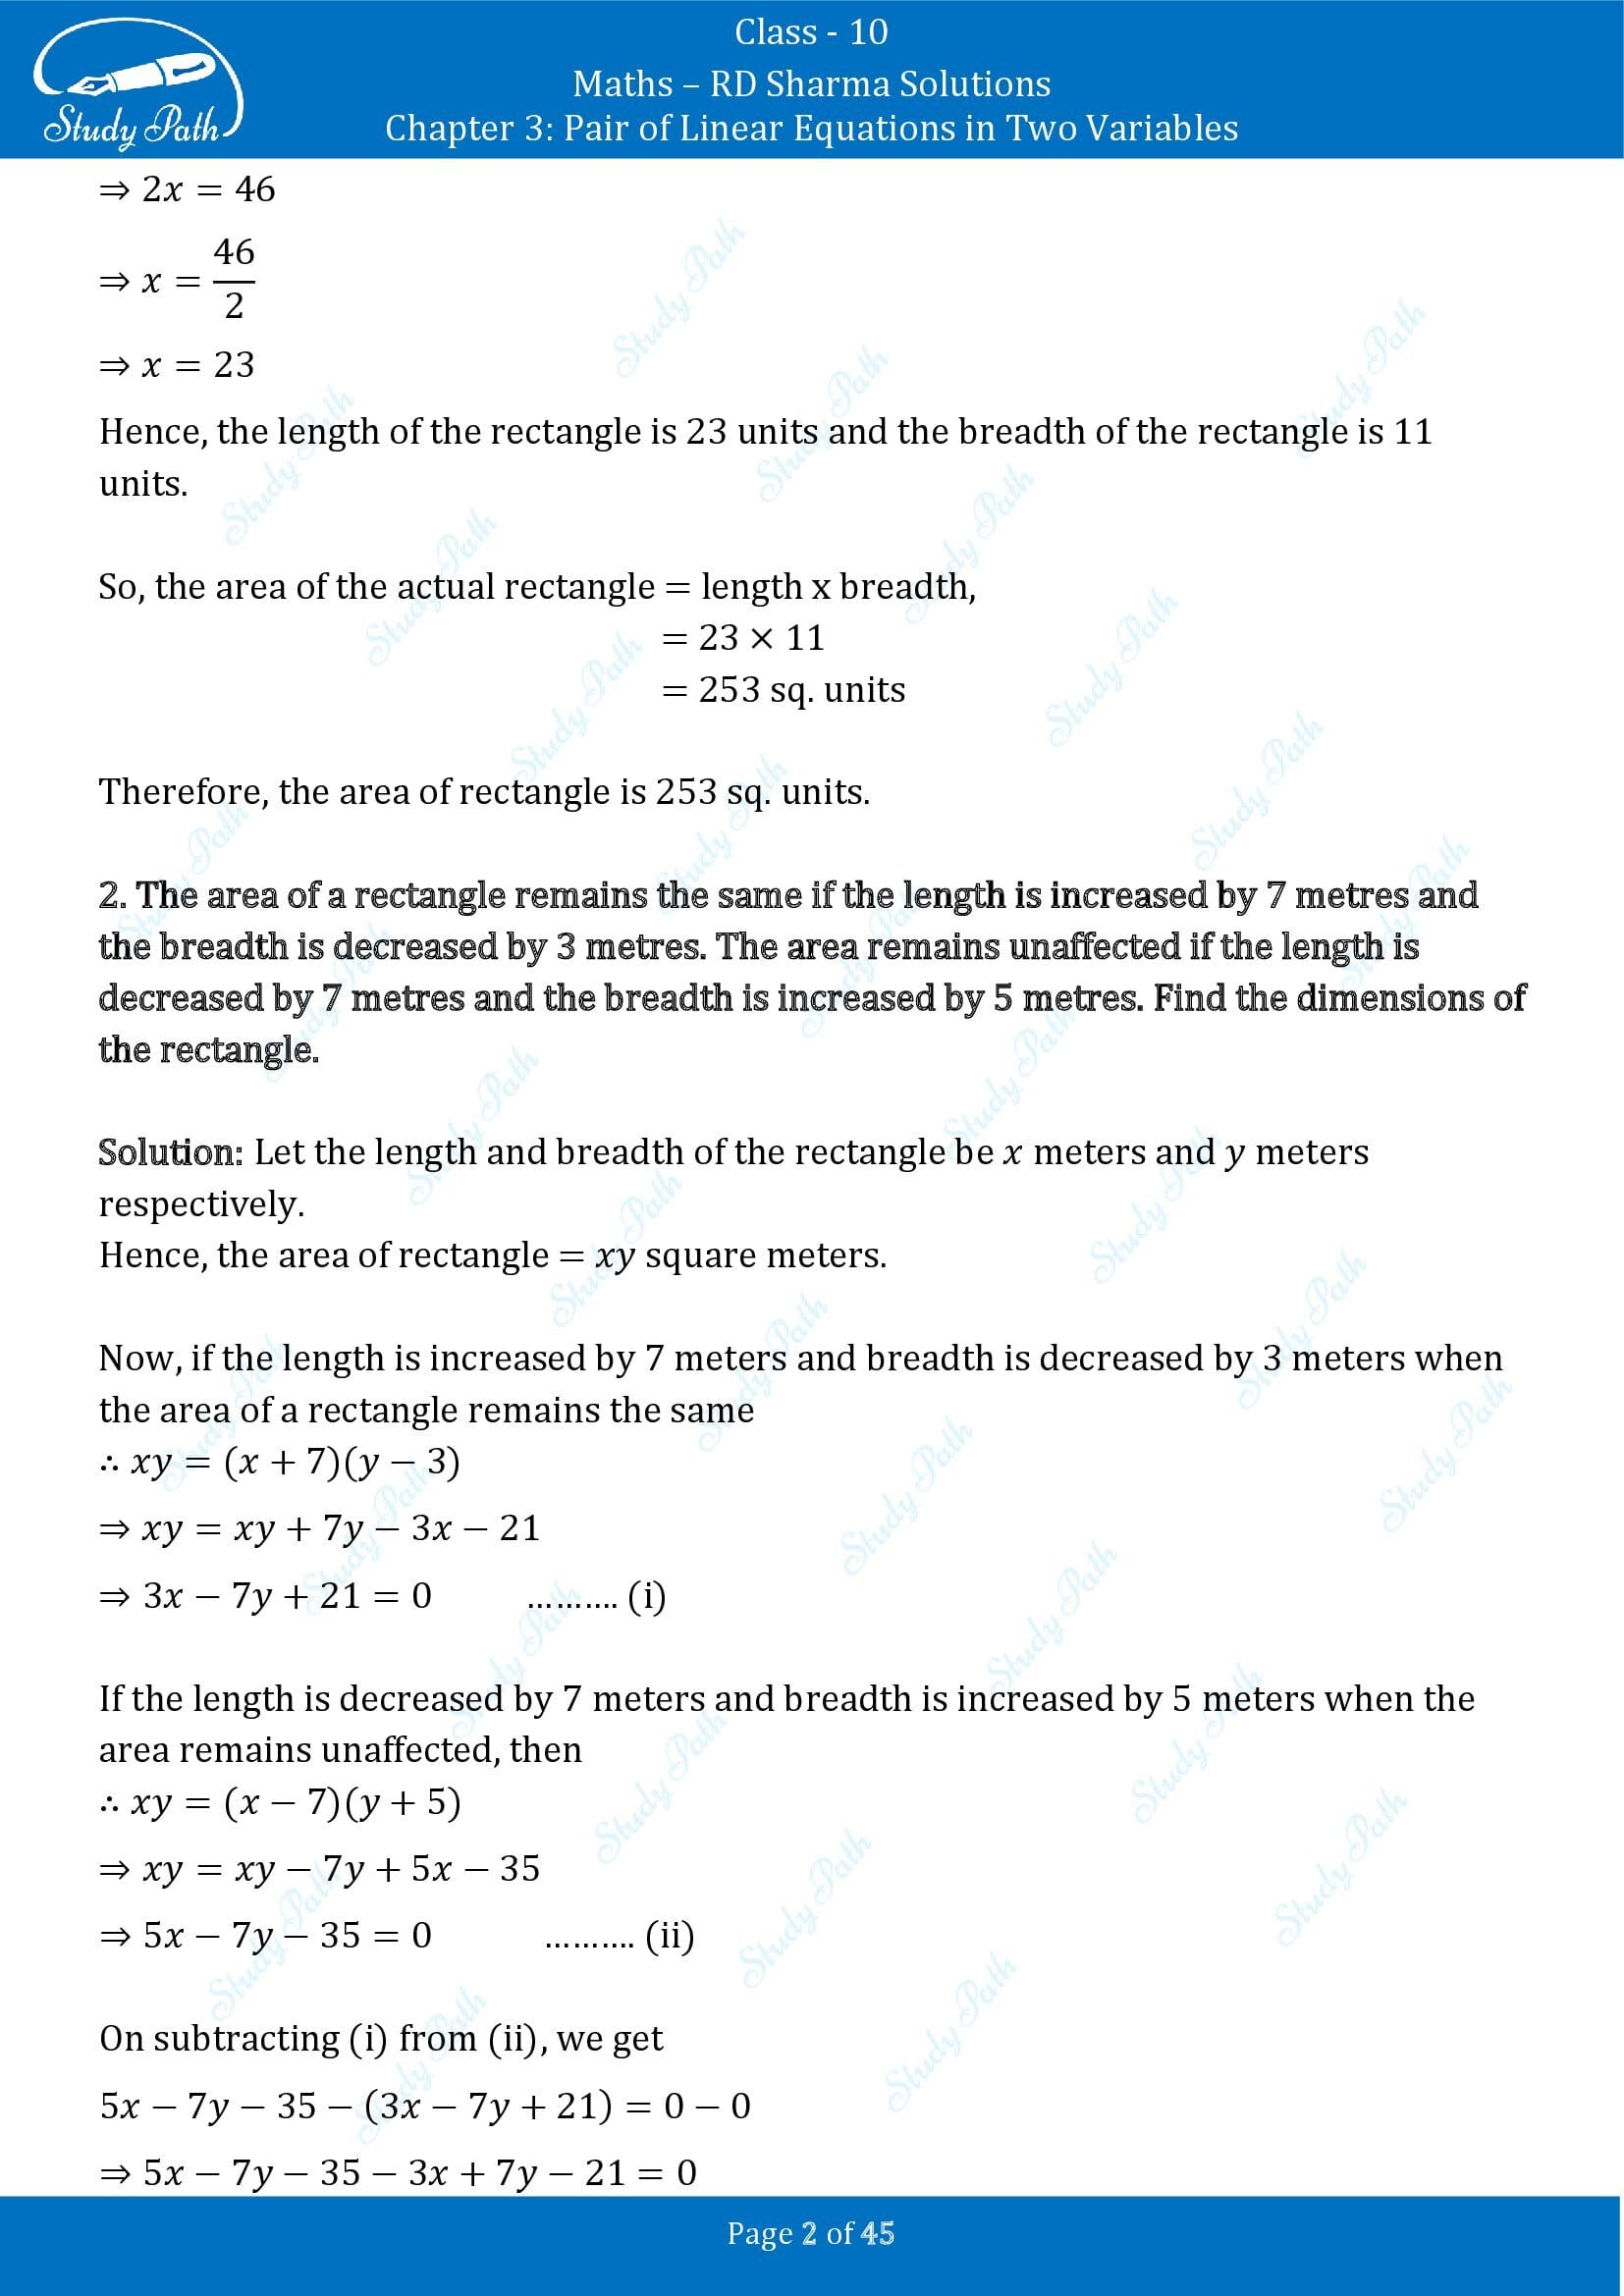 RD Sharma Solutions Class 10 Chapter 3 Pair of Linear Equations in Two Variables Exercise 3.11 00002